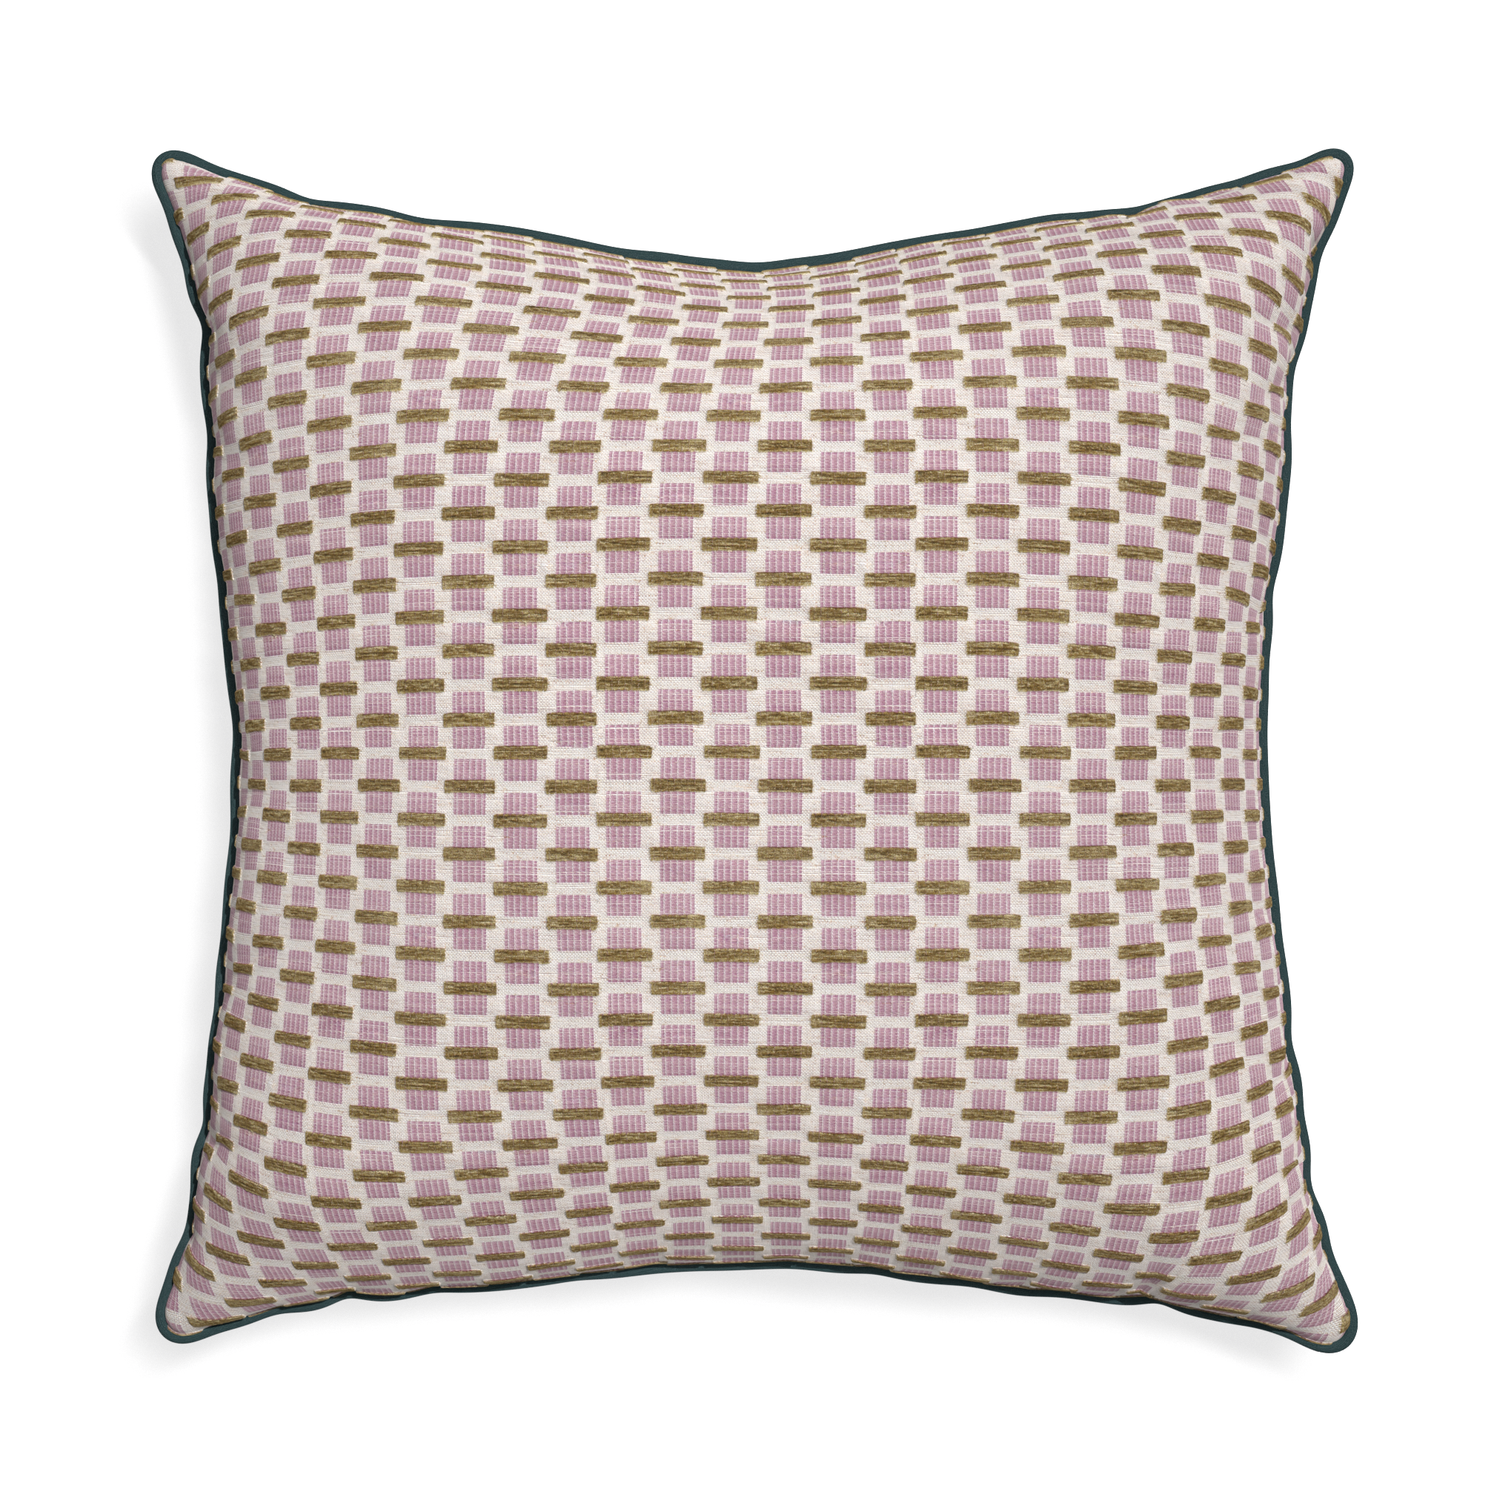 Euro-sham willow orchid custom pink geometric chenillepillow with p piping on white background